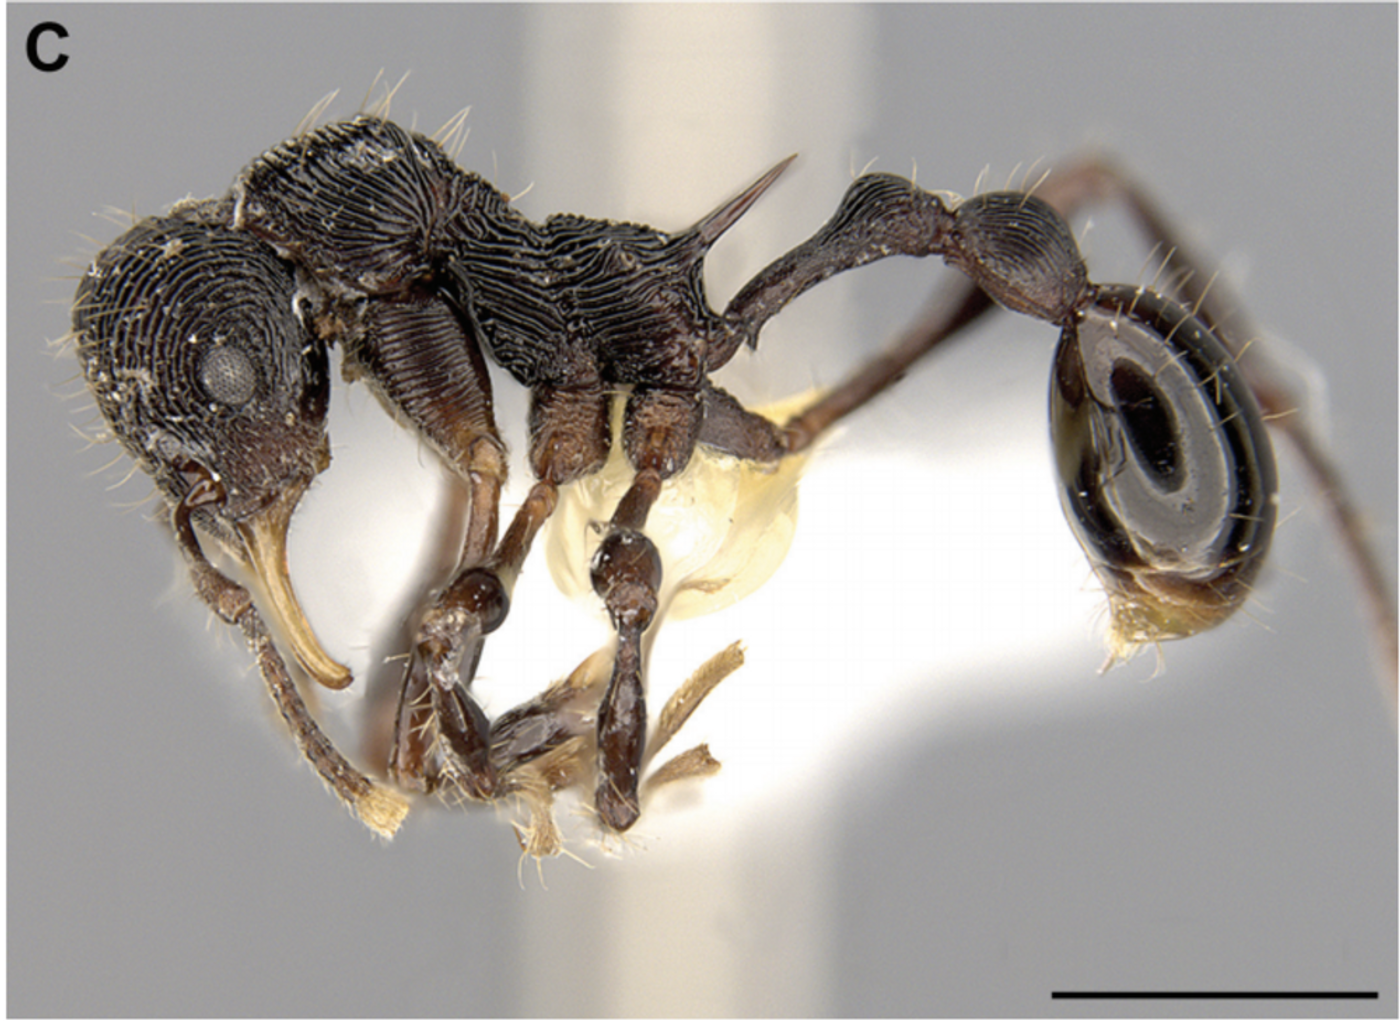 The new ant species that was found in a frog's puke.